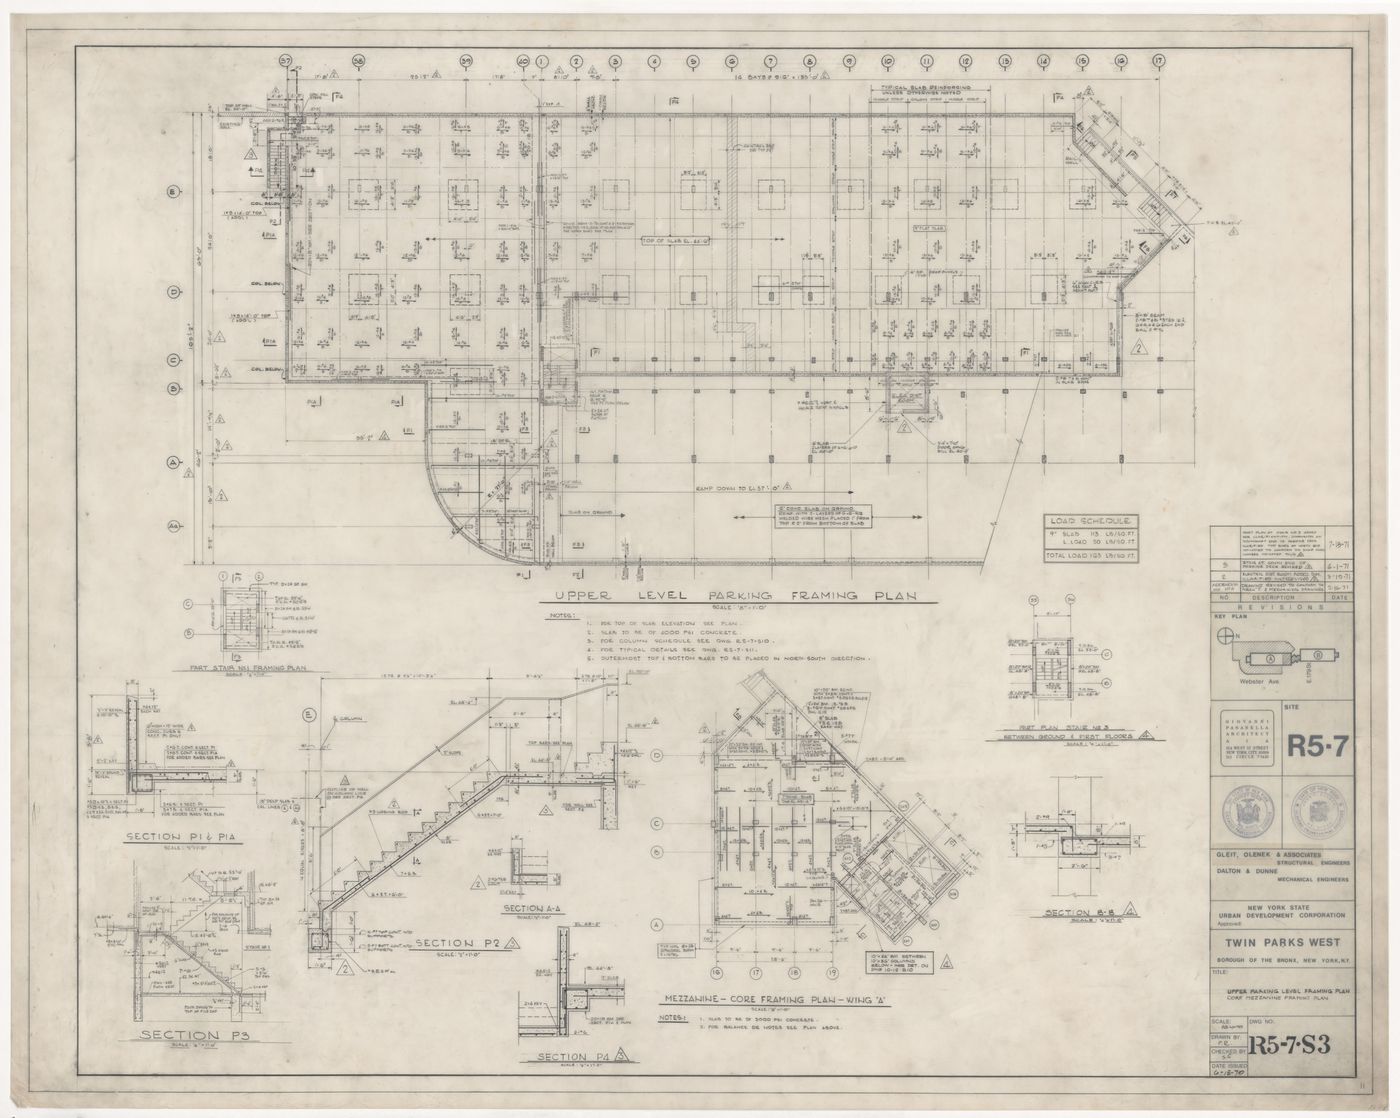 Framing plans and details for Twin Parks West, Site R5-7, Bronx, New York